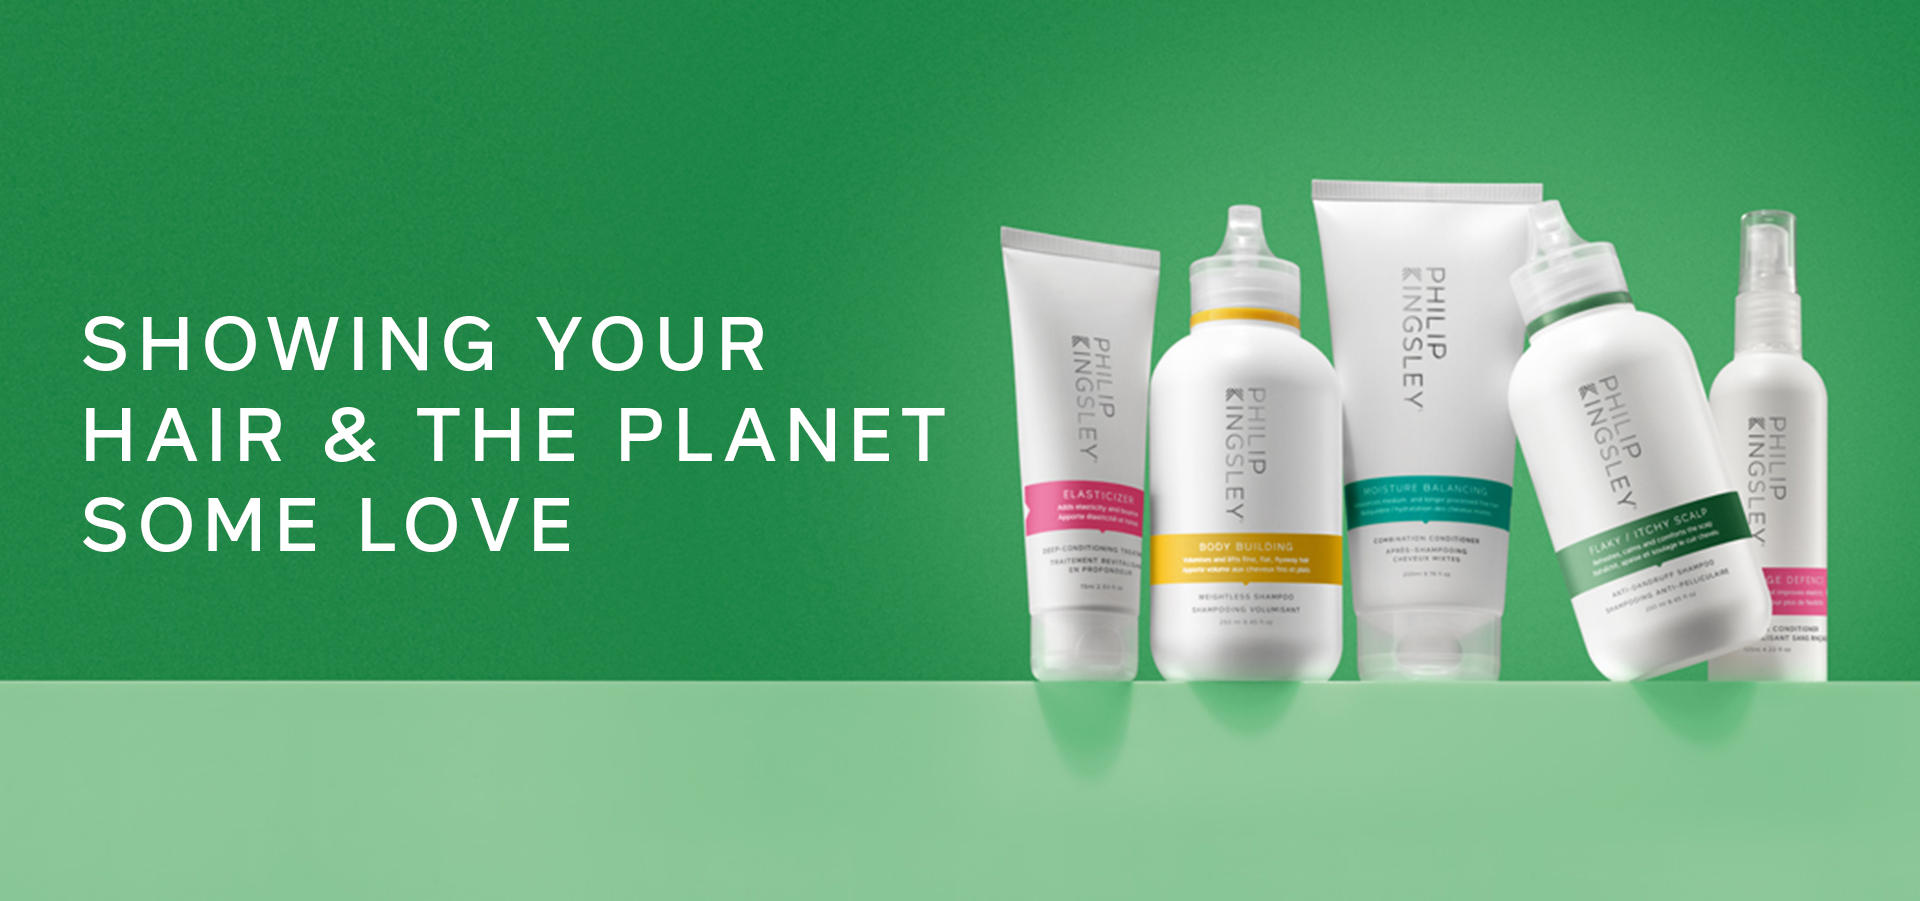 Philip Kingsley | Sustainable Hair Care Brand